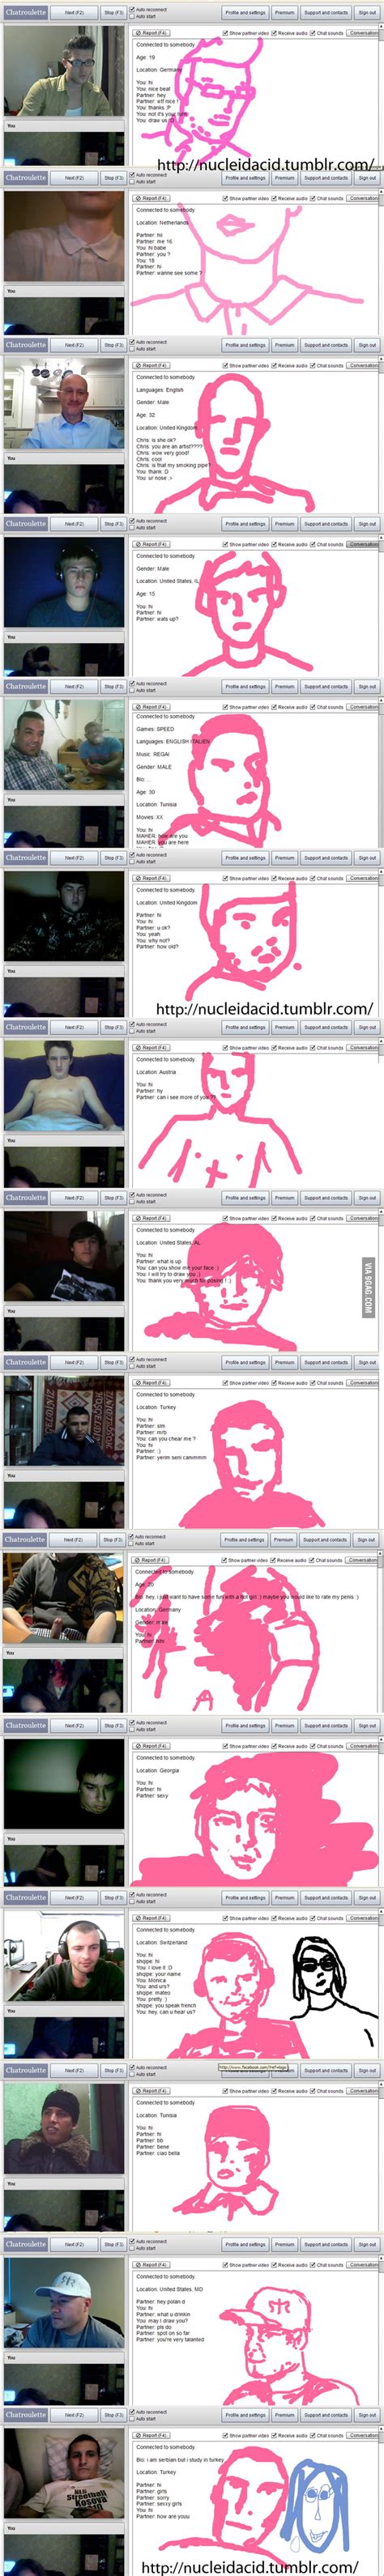 some fun with chatroulette 9gag